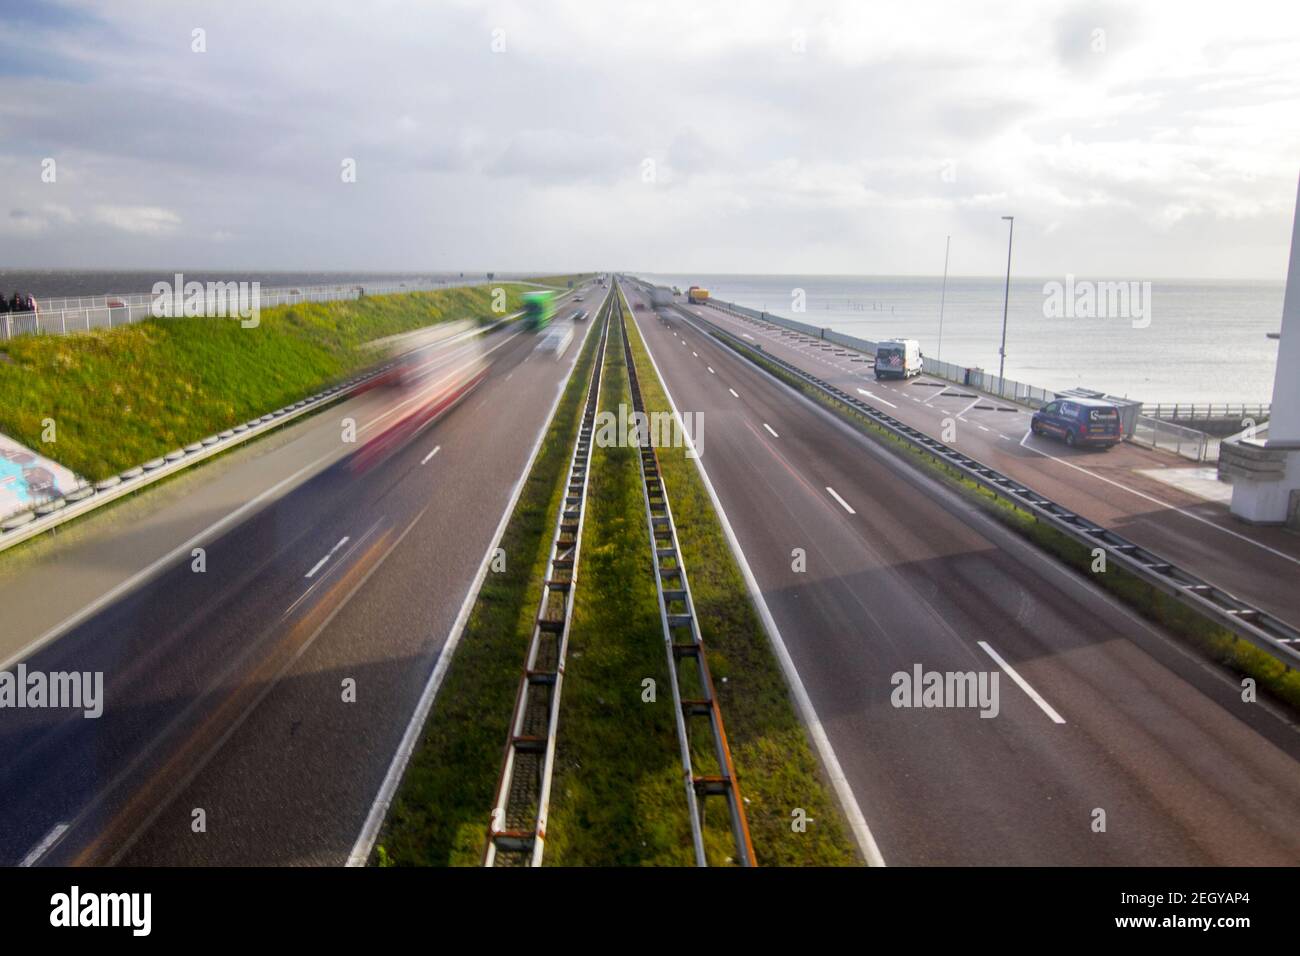 Motorway A7 on Afsluitdijk, a dam separating the North Sea from the Ijsselmeer lake. View from bridge at Breezanddijk, an artificial island created by Stock Photo